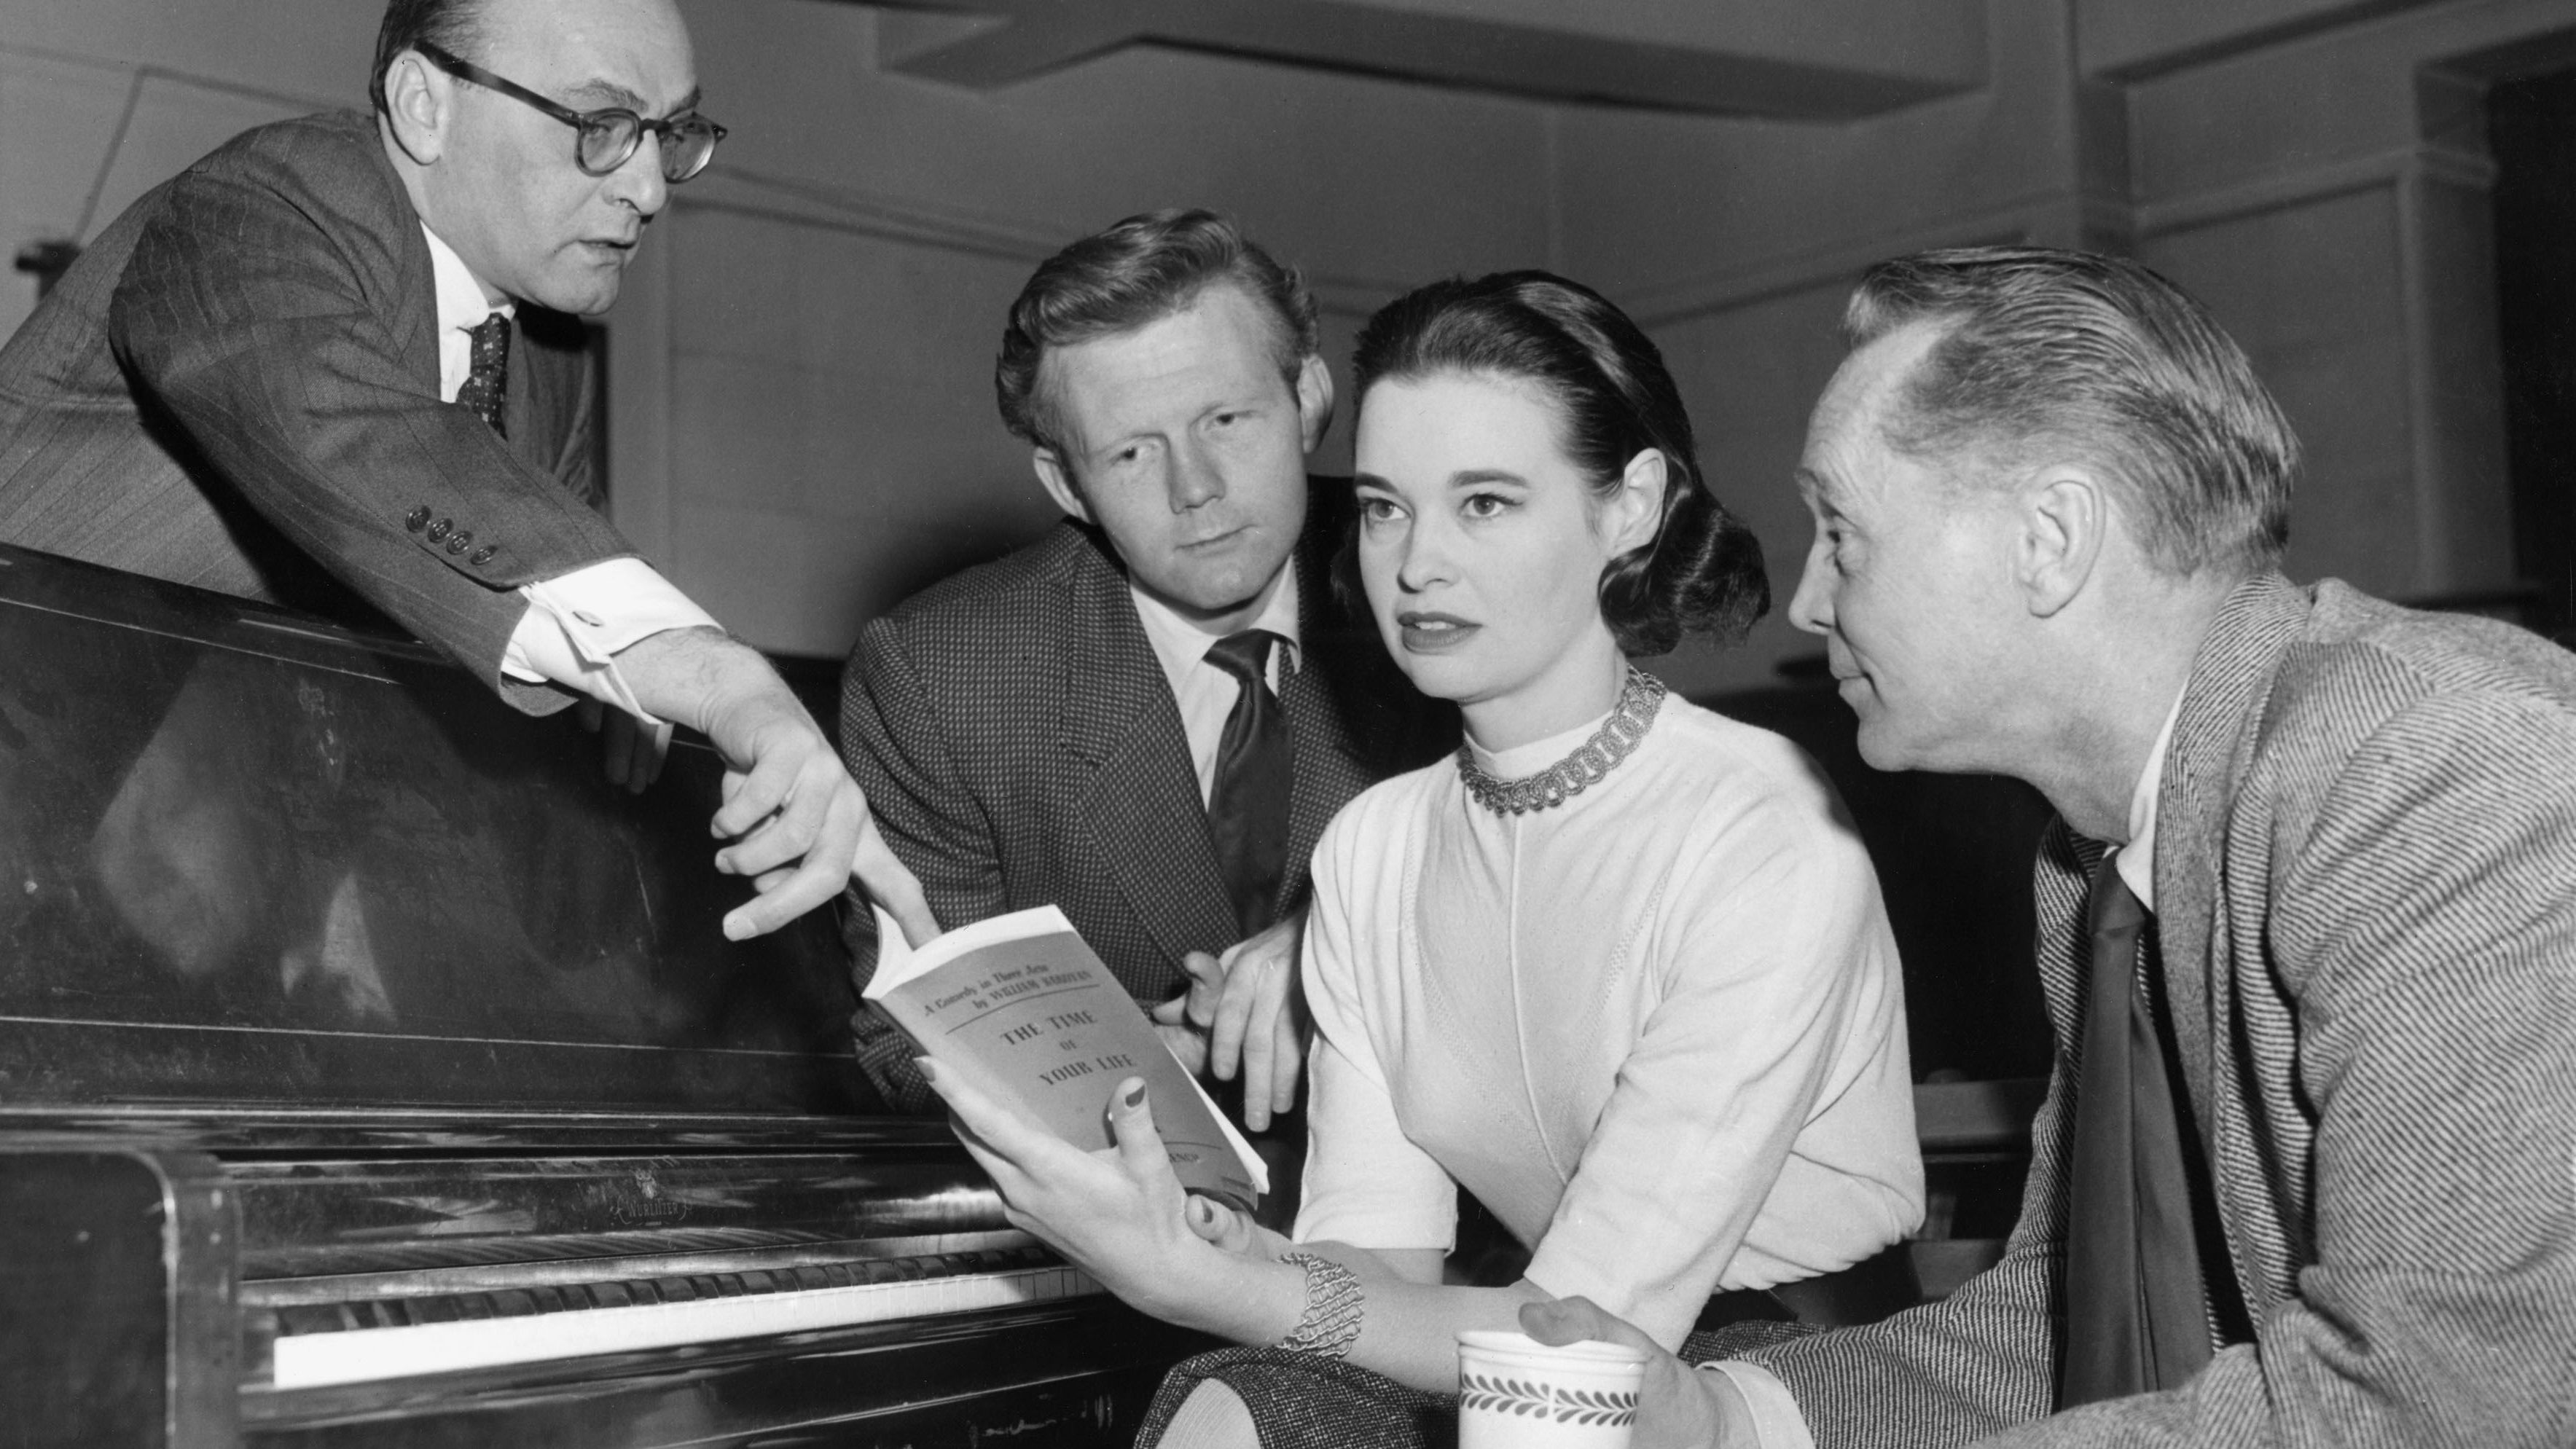 Vanderbilt goes over her script during rehearsals for the "The Time of Your Life" in 1955.